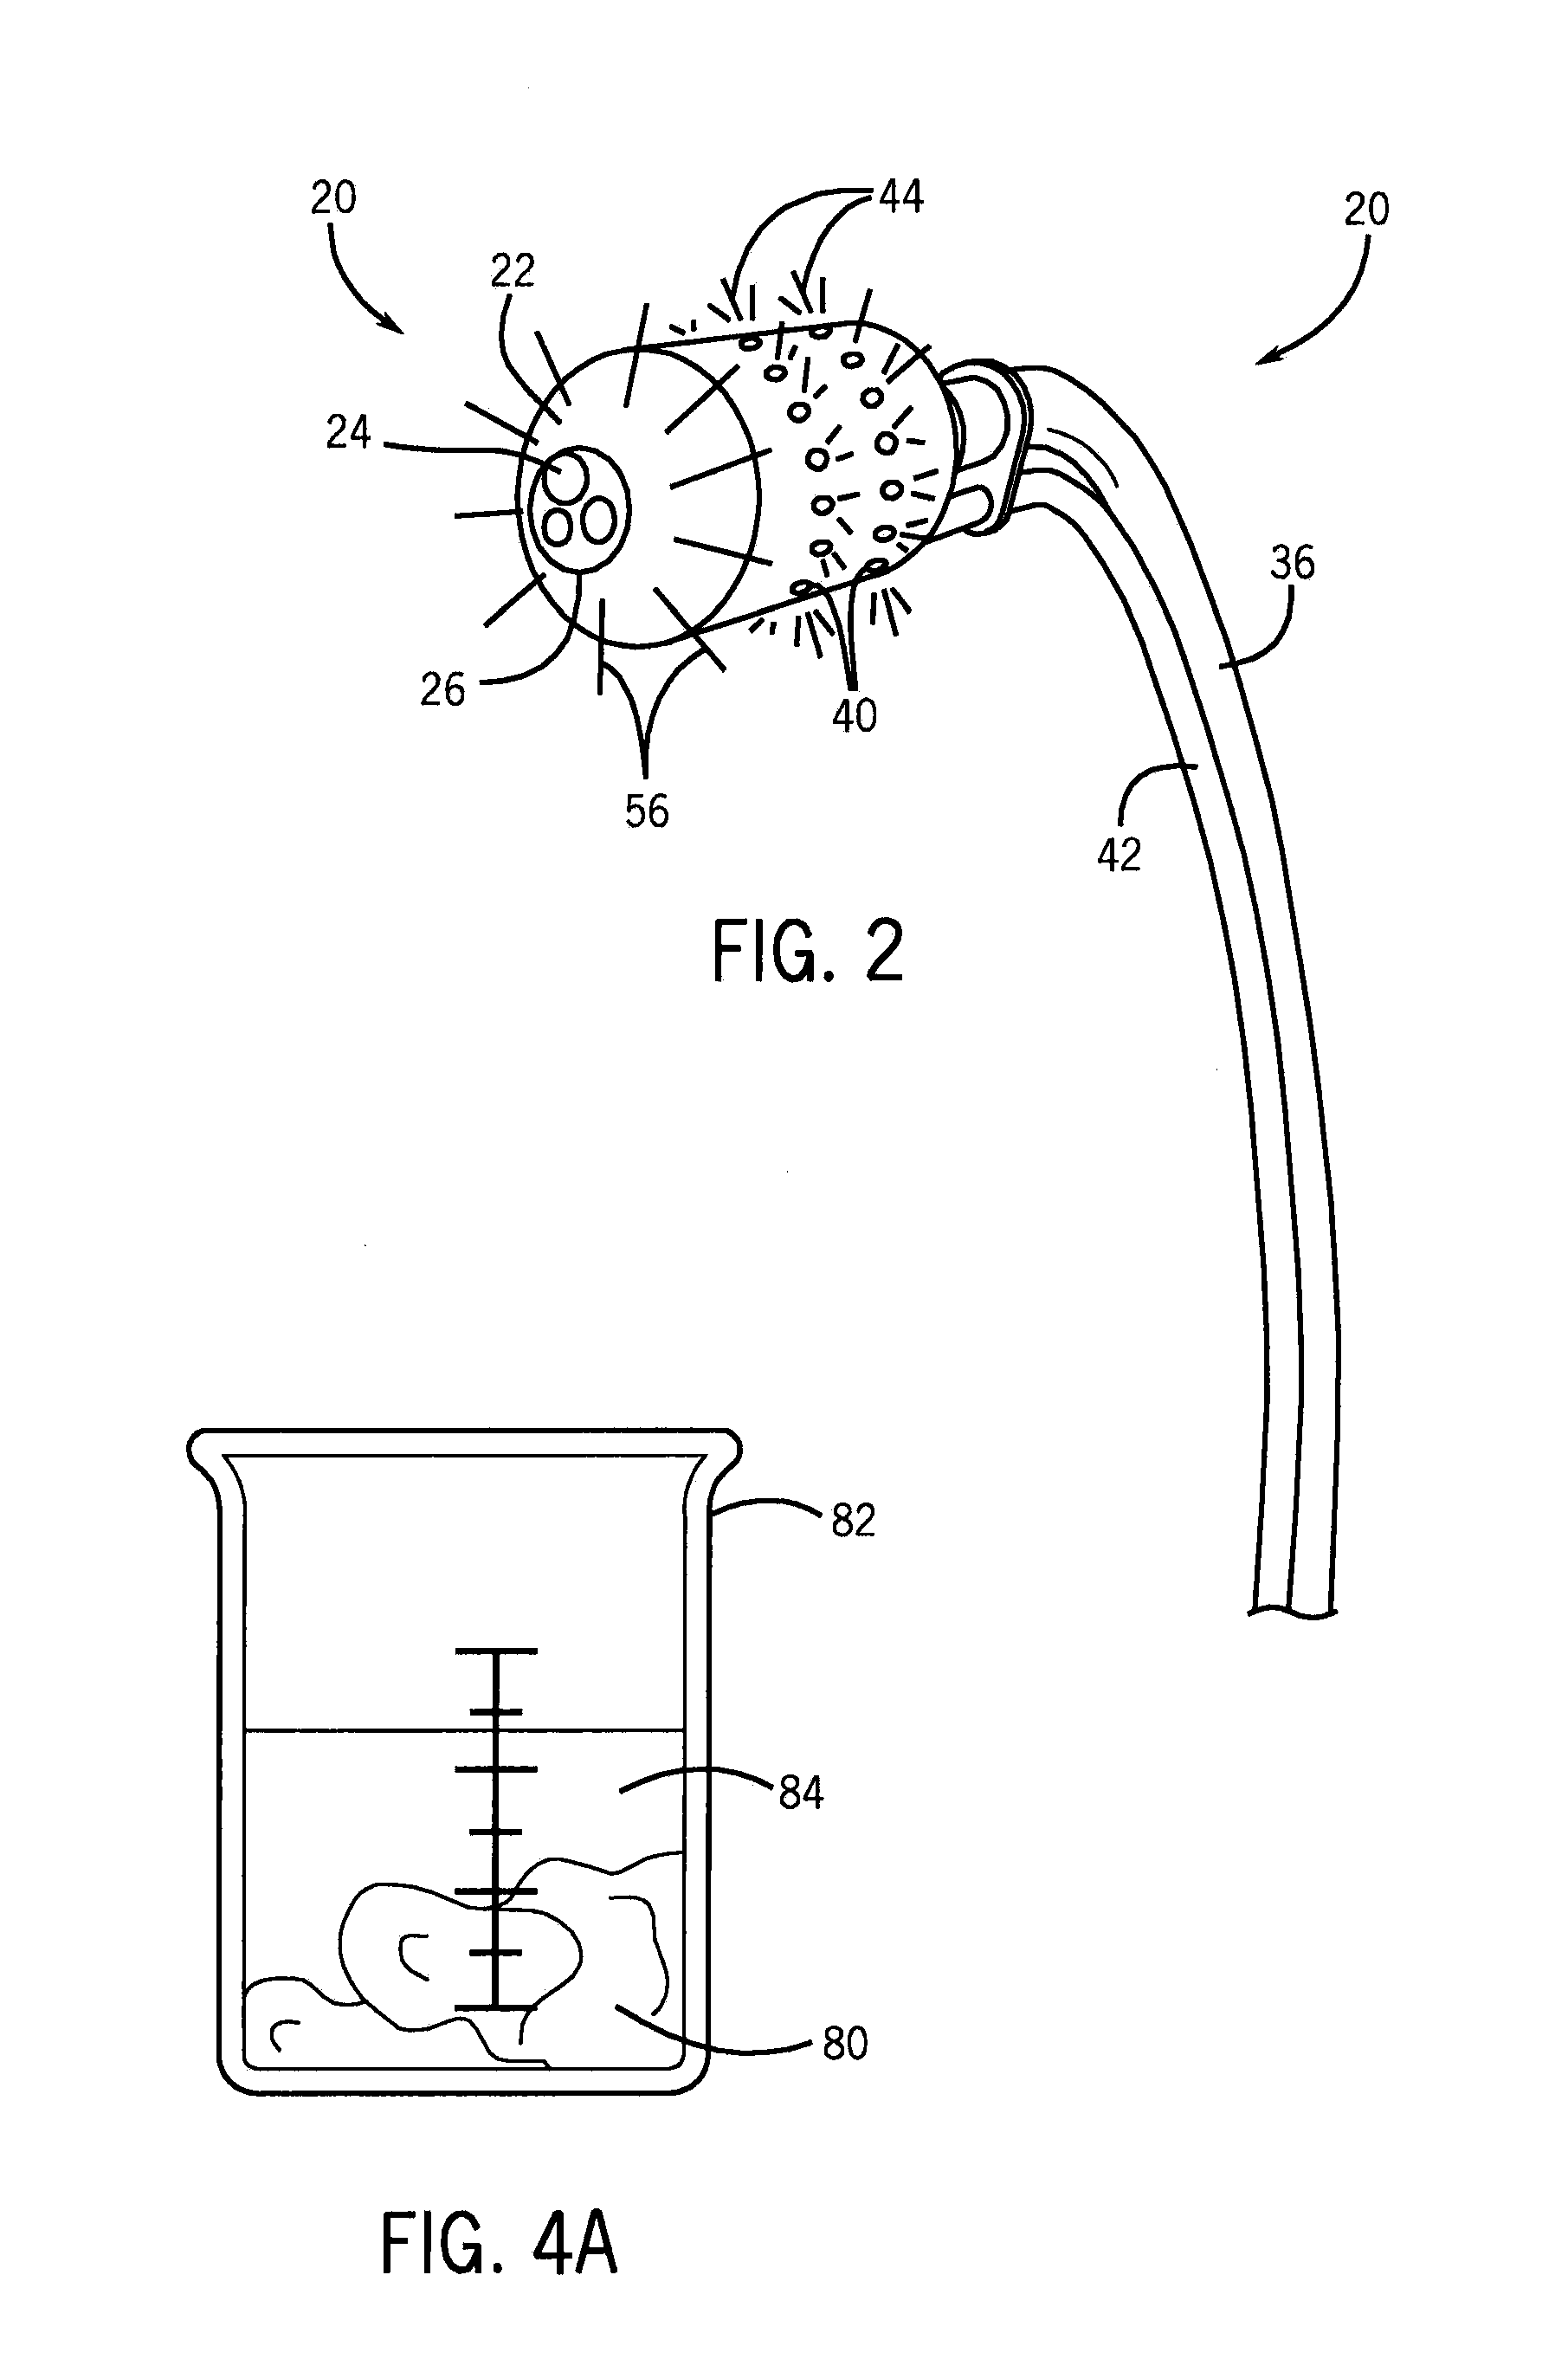 Colonoscopy systems and methods